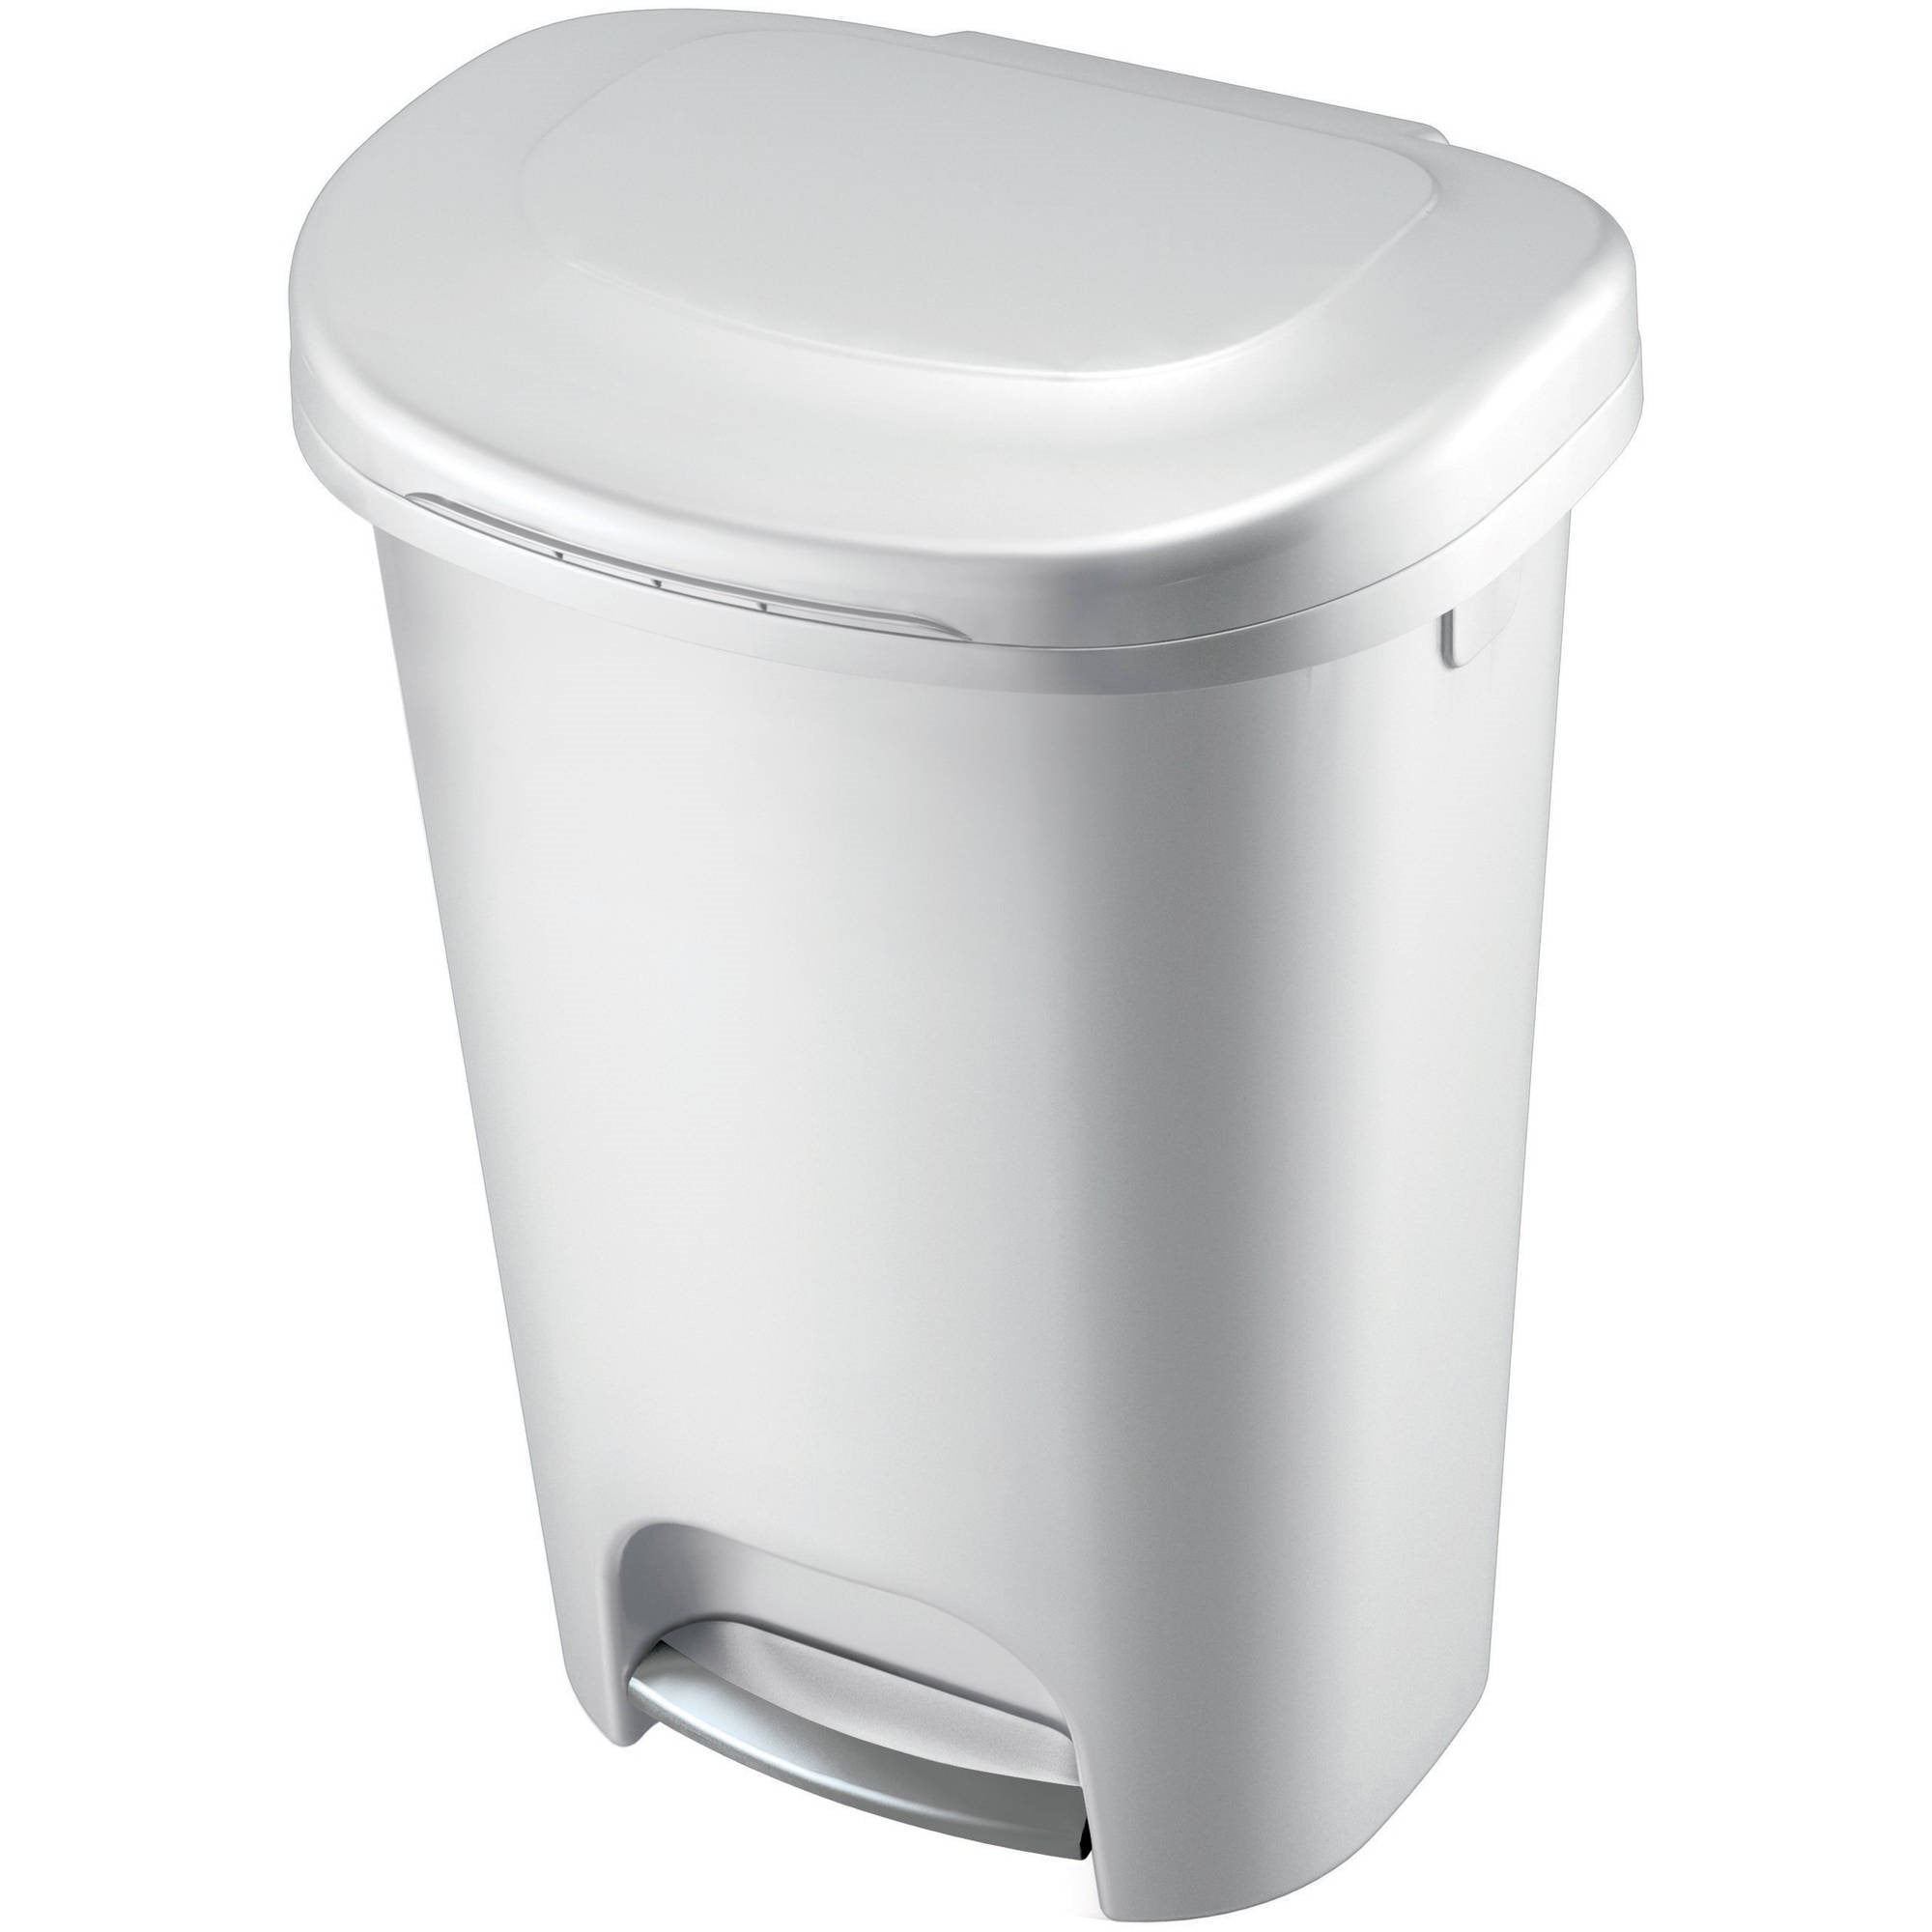 Rubbermaid 6020896 13 gal Premium Gray Step-On Trash Can - Pack of 4, 1 -  Kroger